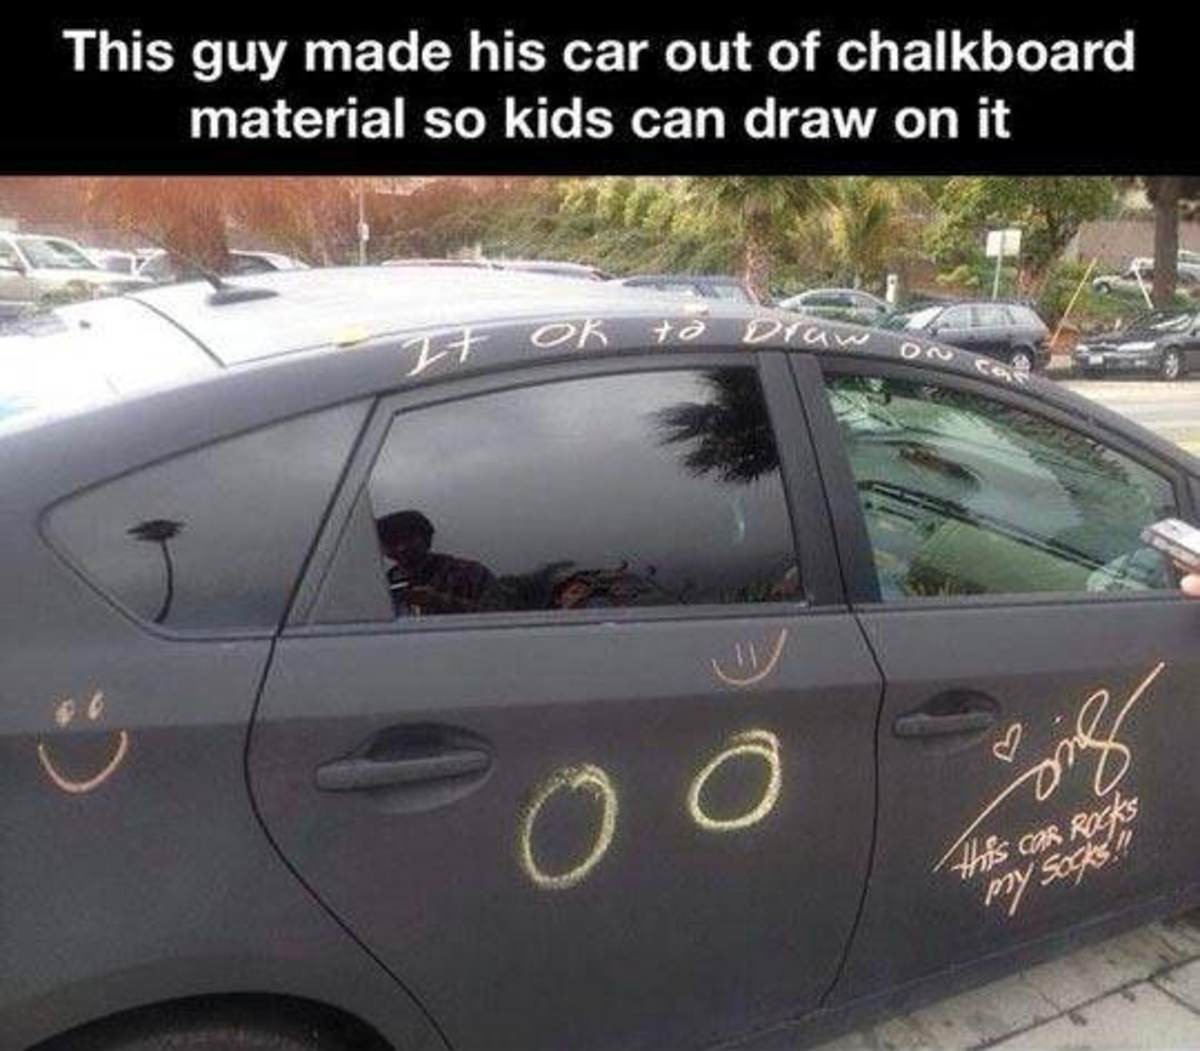 Lovely Day. . This guy anade his car out of chalkboard material so kids can draw on itrungentleman walking in 1' Wendy' s '" ii' ' an umbrella table outside '''